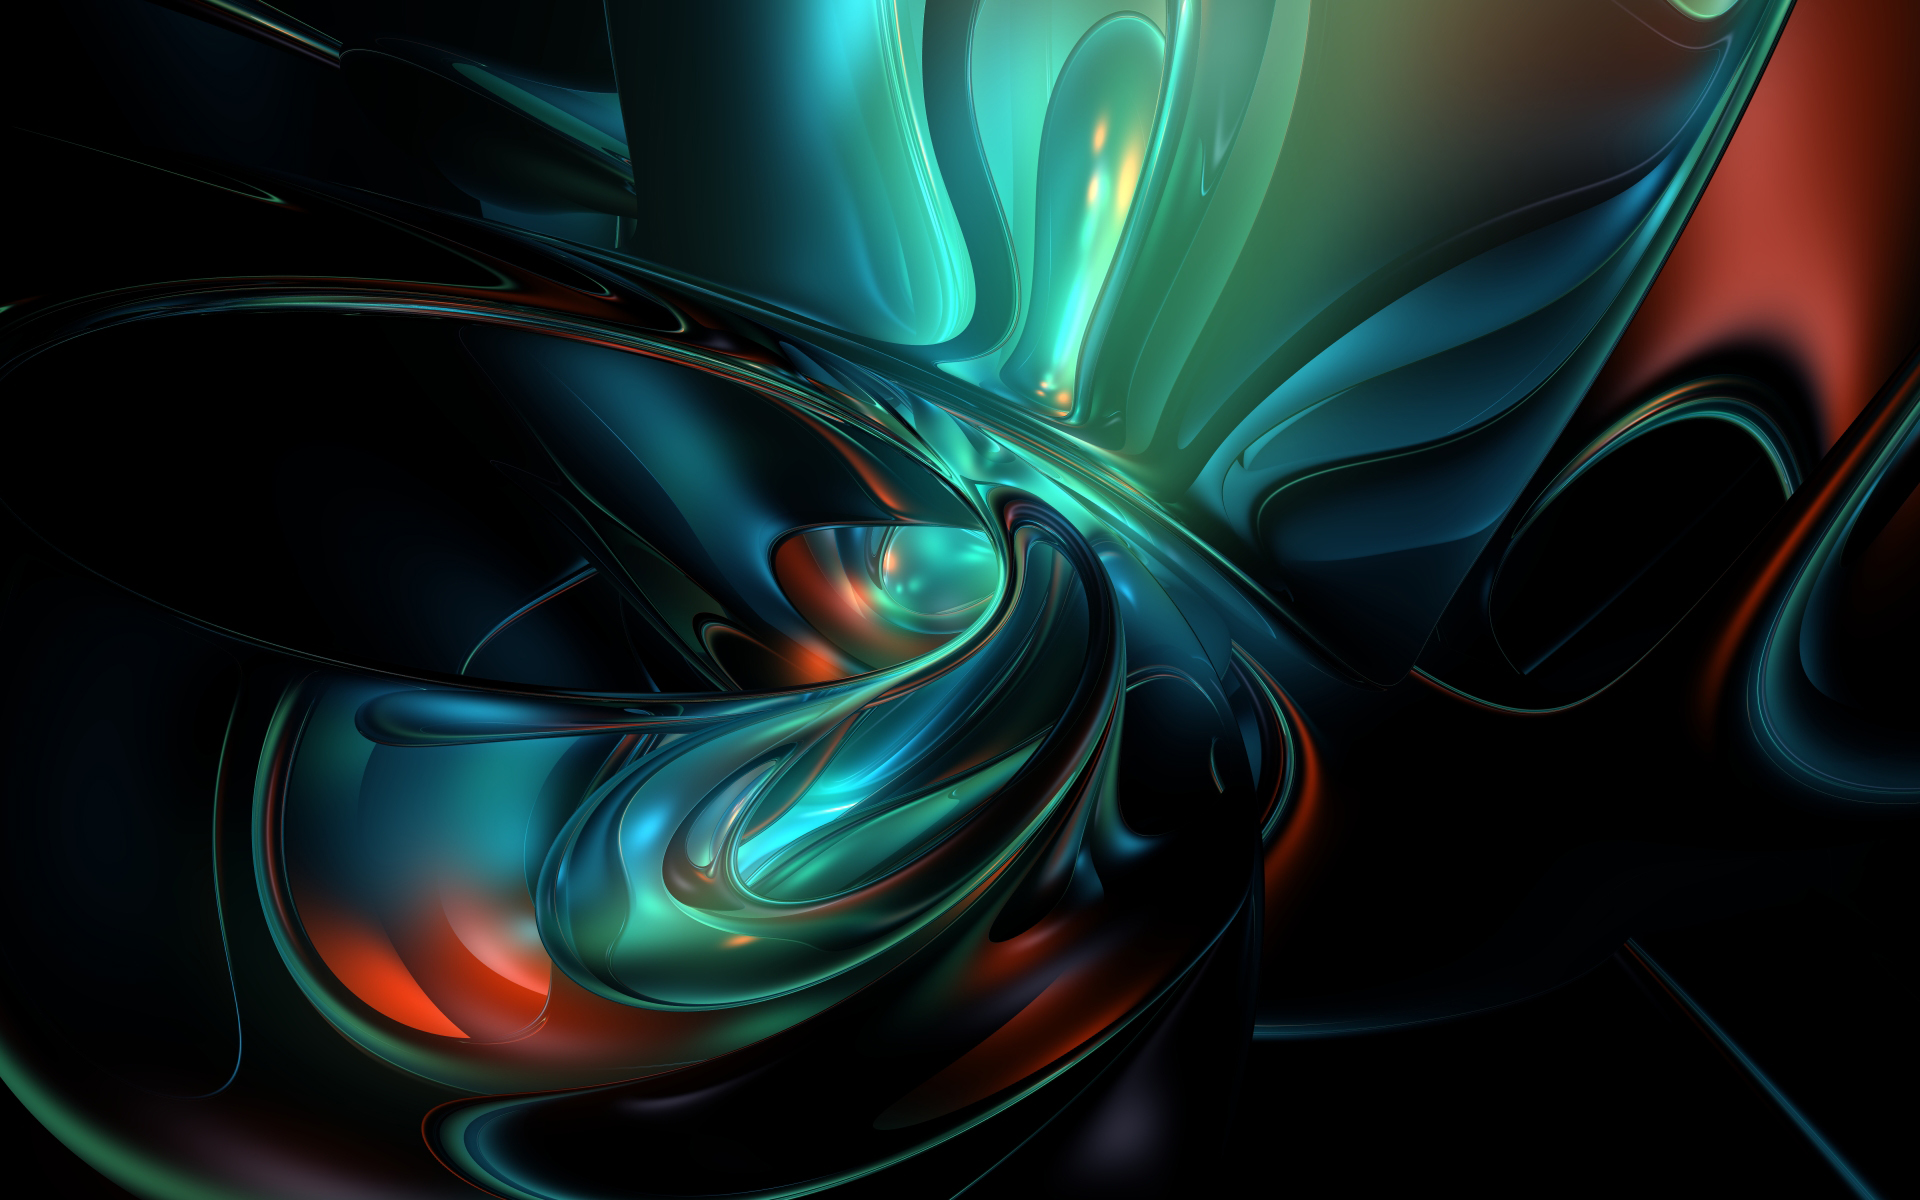 abstract cool wallpapers wallpapers55com   Best Wallpapers for PCs 1920x1200